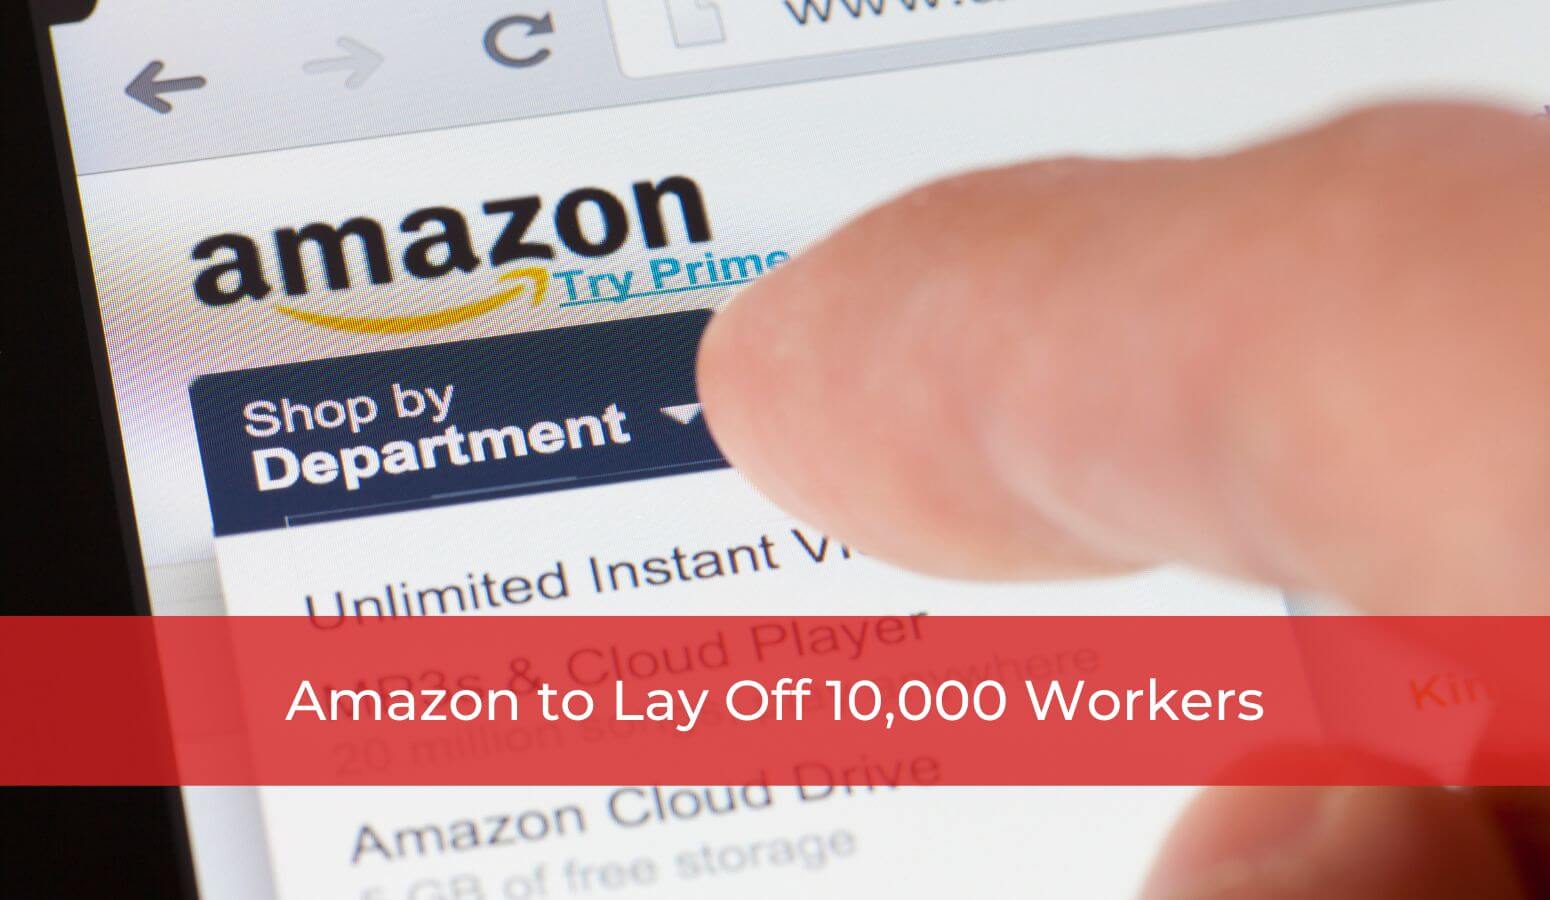 Featured image for “Amazon to Lay Off 10,000 Workers”